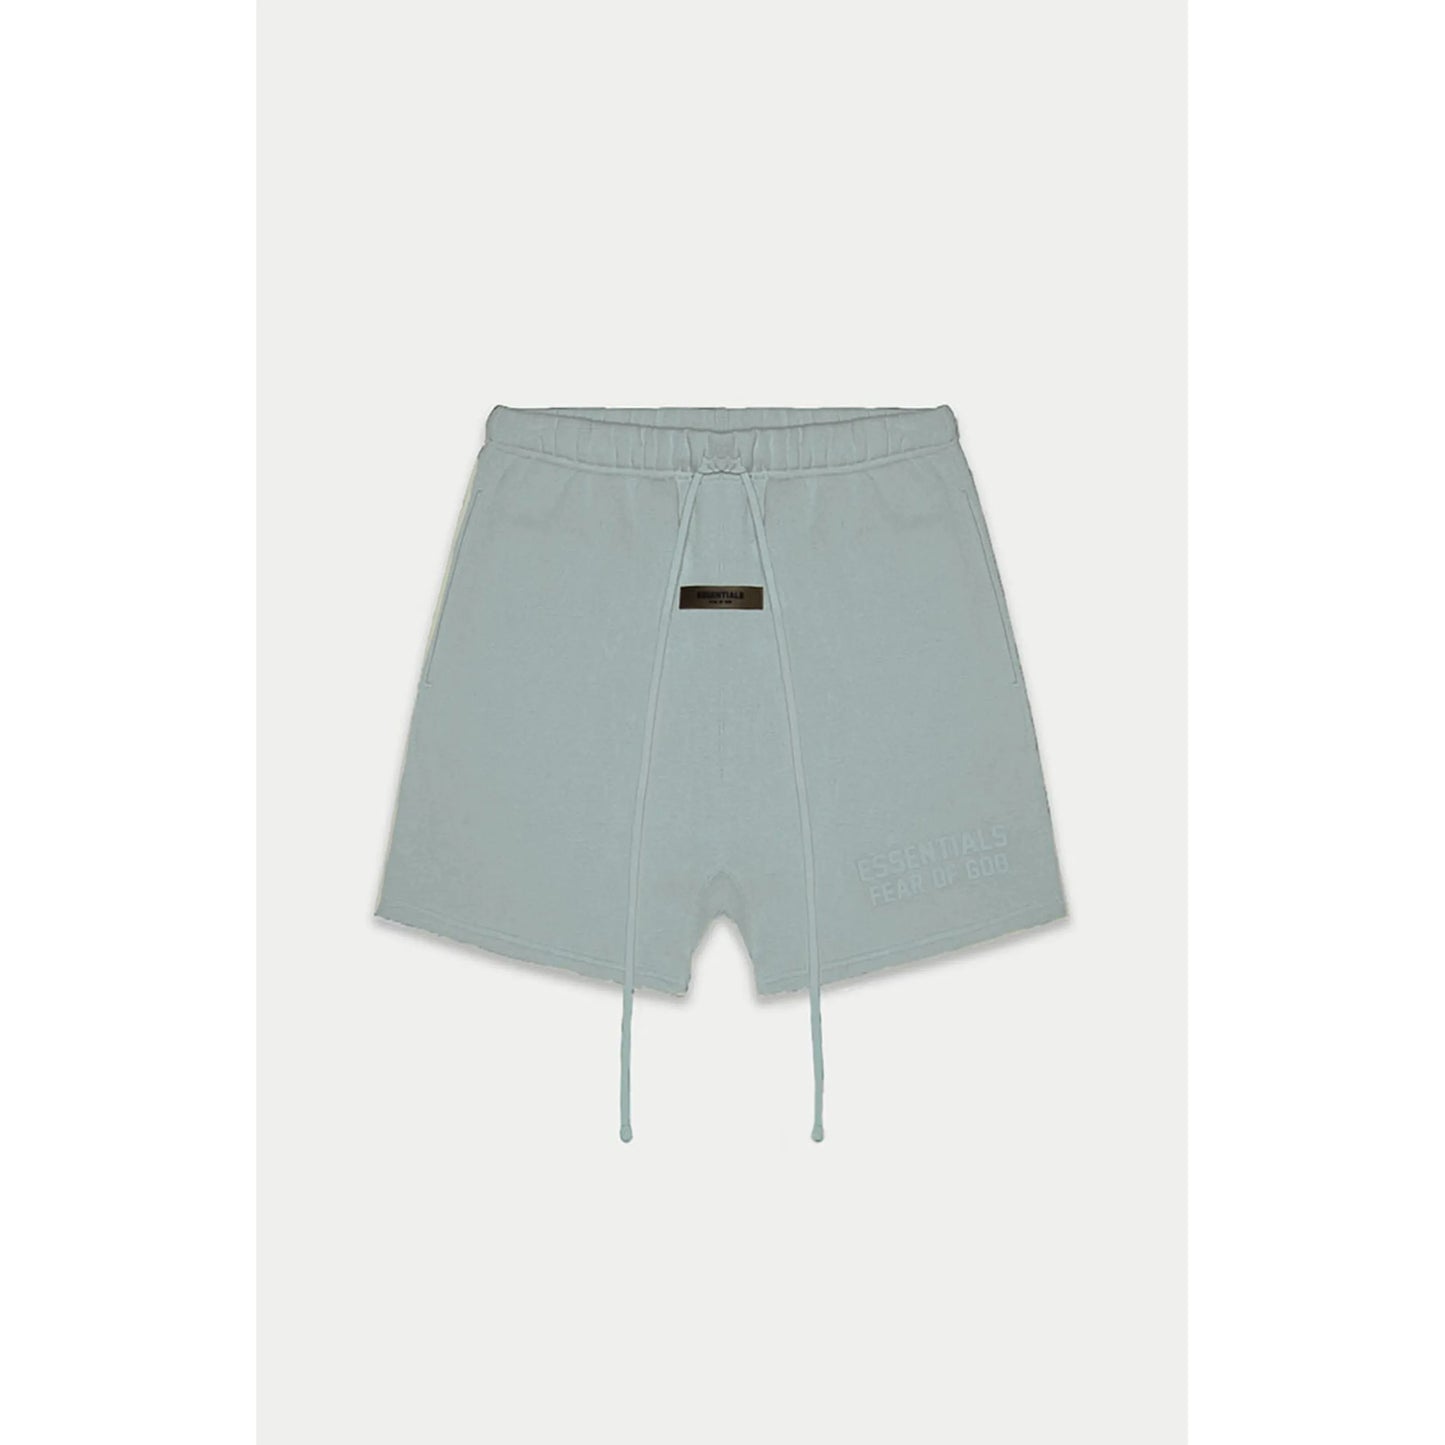 Fear of God Essentials Shorts 'Sycamore'